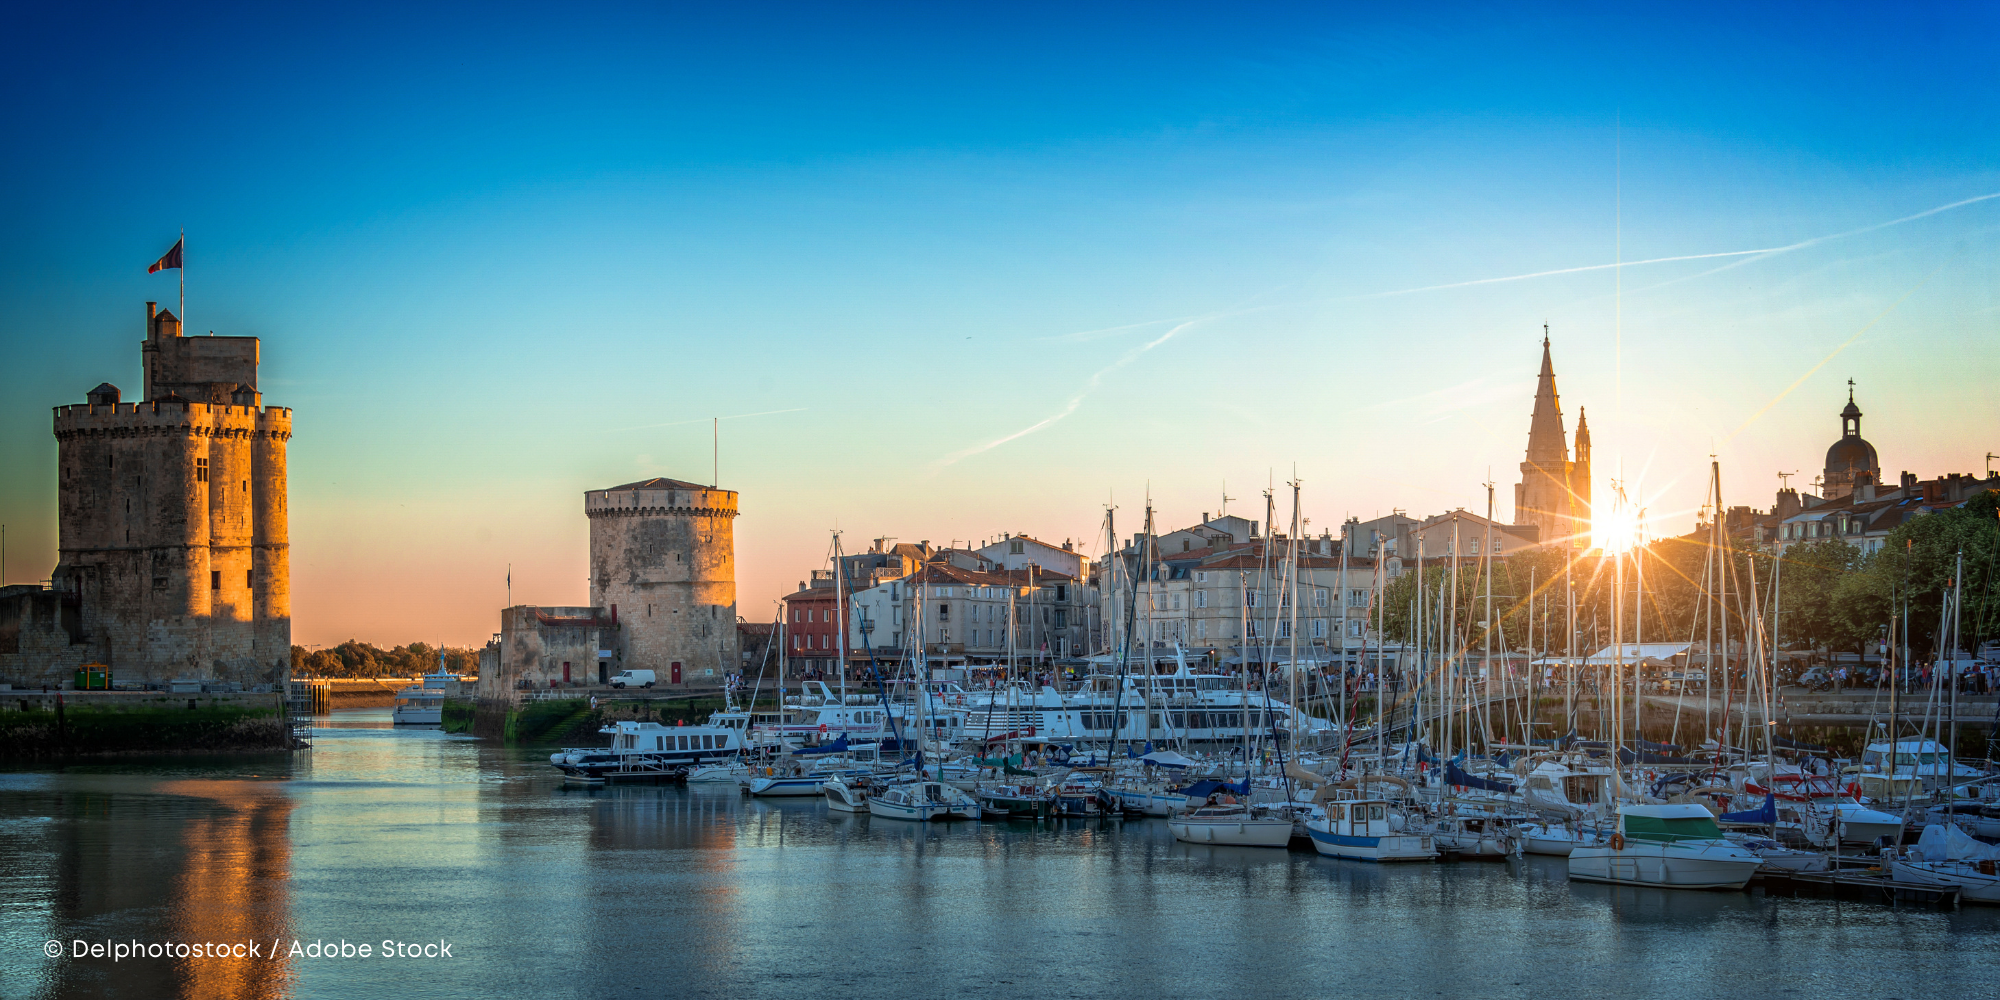 Panorama of the old harbor of La Rochelle, France at sunset